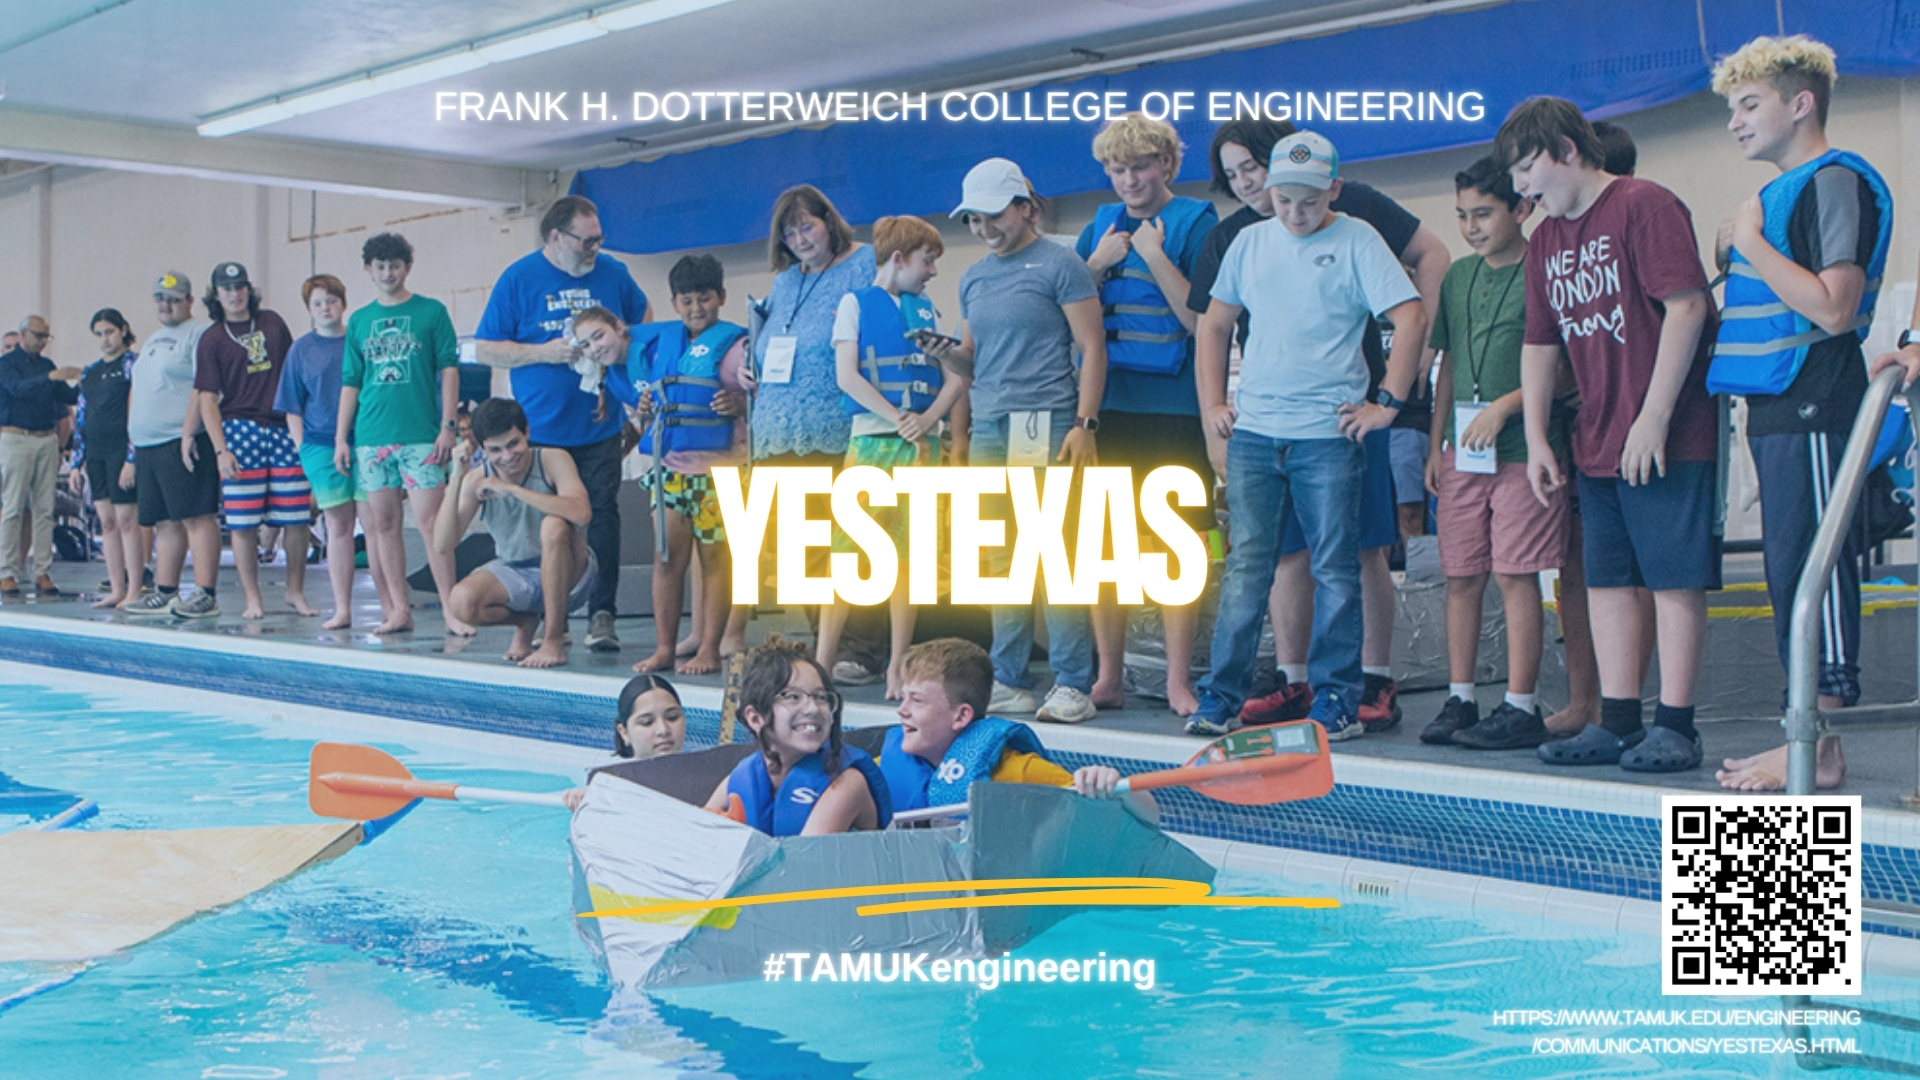 Students engage in activities hosted by the Frank H. Dotterweich College of Engineering.